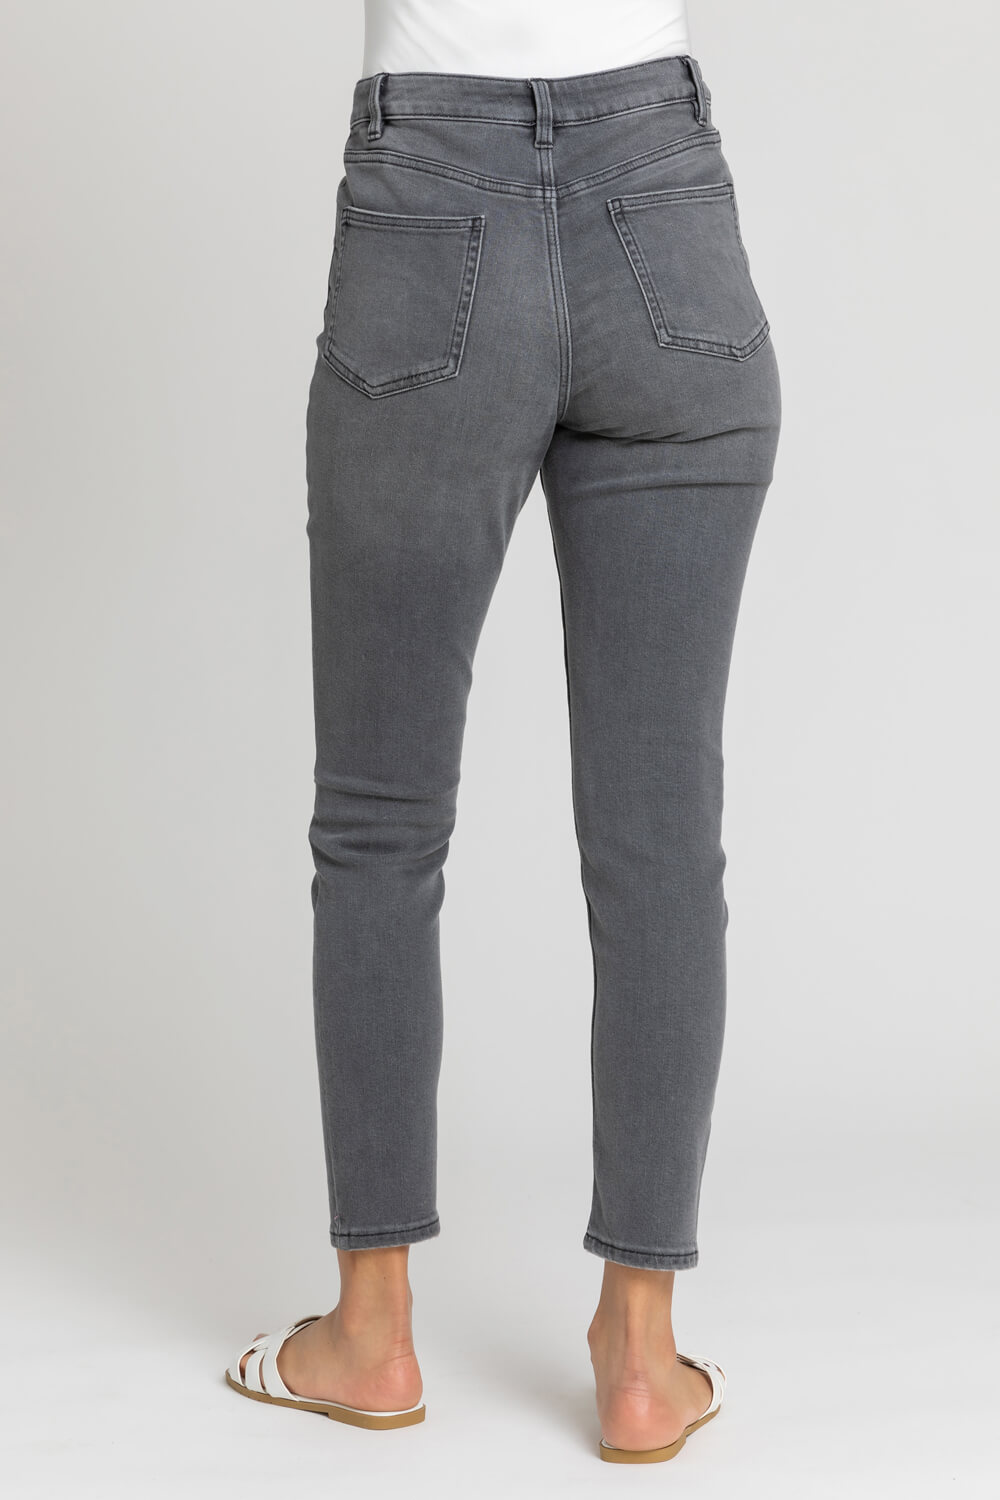 Grey Ripped Stretch Skinny Jeans, Image 2 of 5